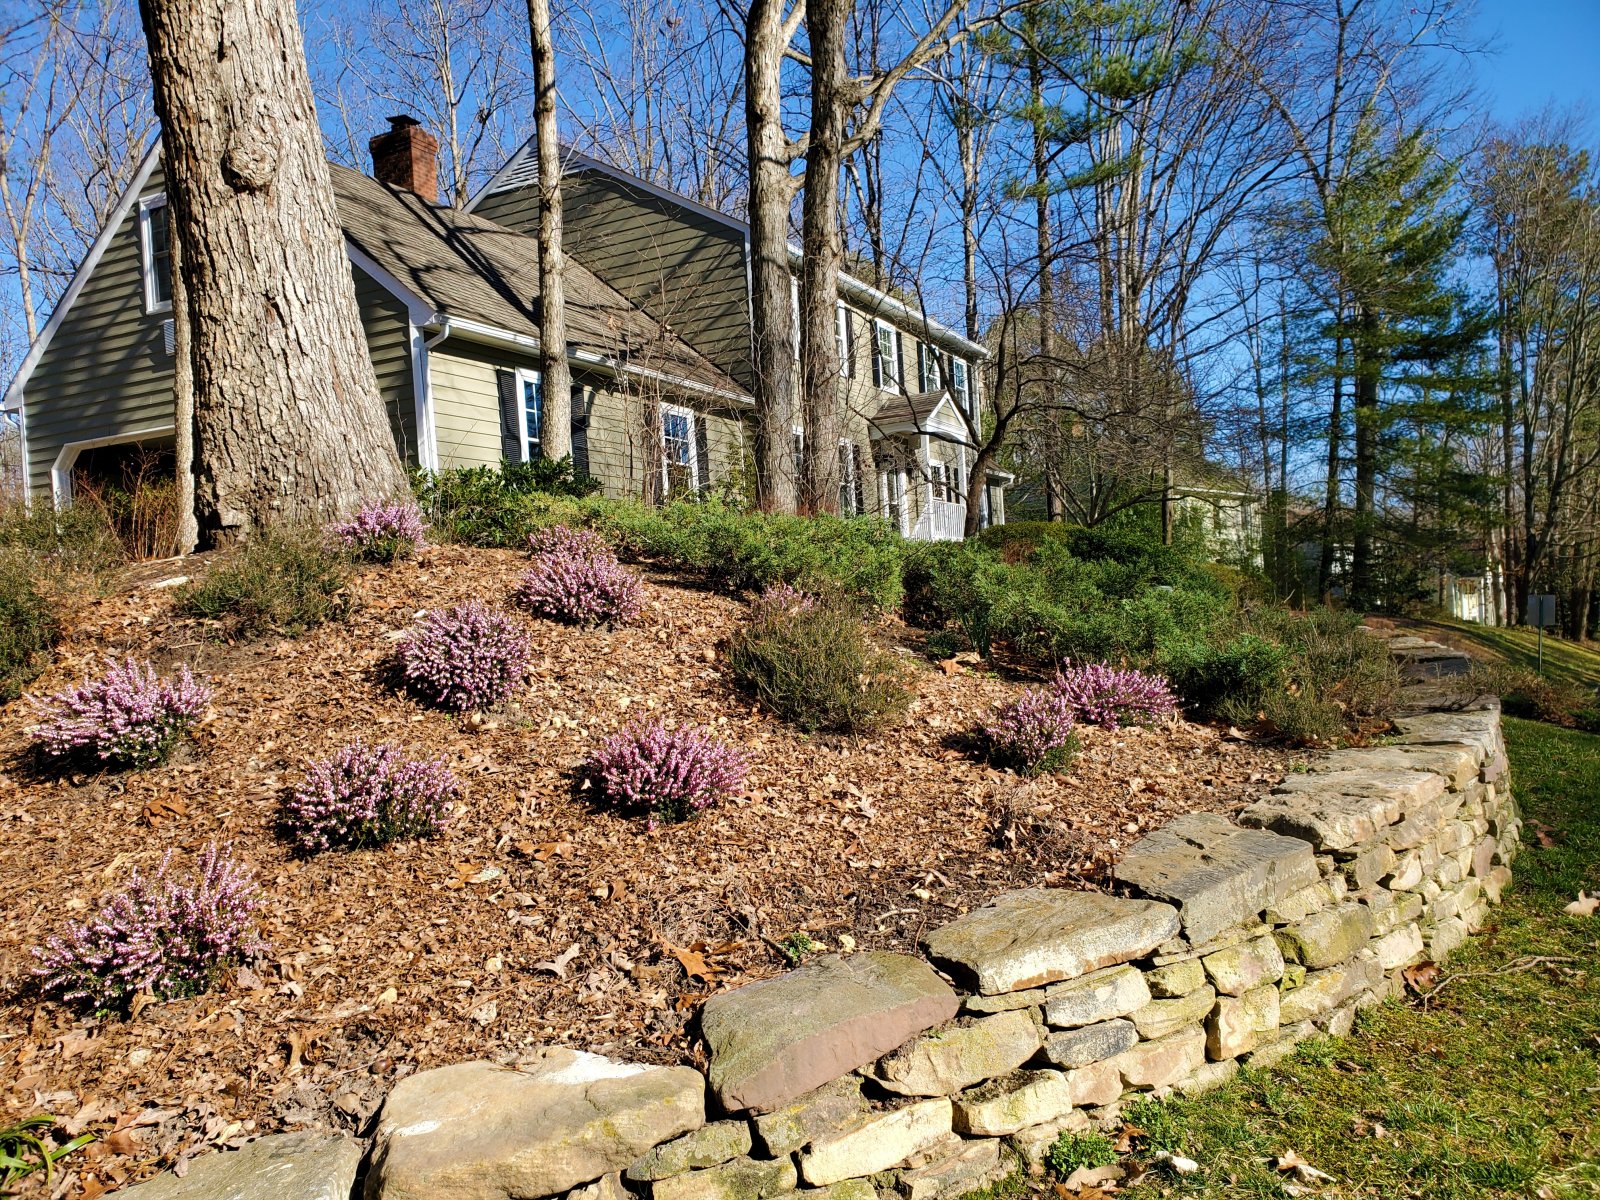 Stone retaining wall. Heather blooming in March : Pavers & Stone : Richmond VA Landscape Designer: Gardens by Monit, LLC: Monit Rosendale landscape designer Richmond and Charlottesville Virginia and Fredericksburg Virginia and Williamsburg Virginia